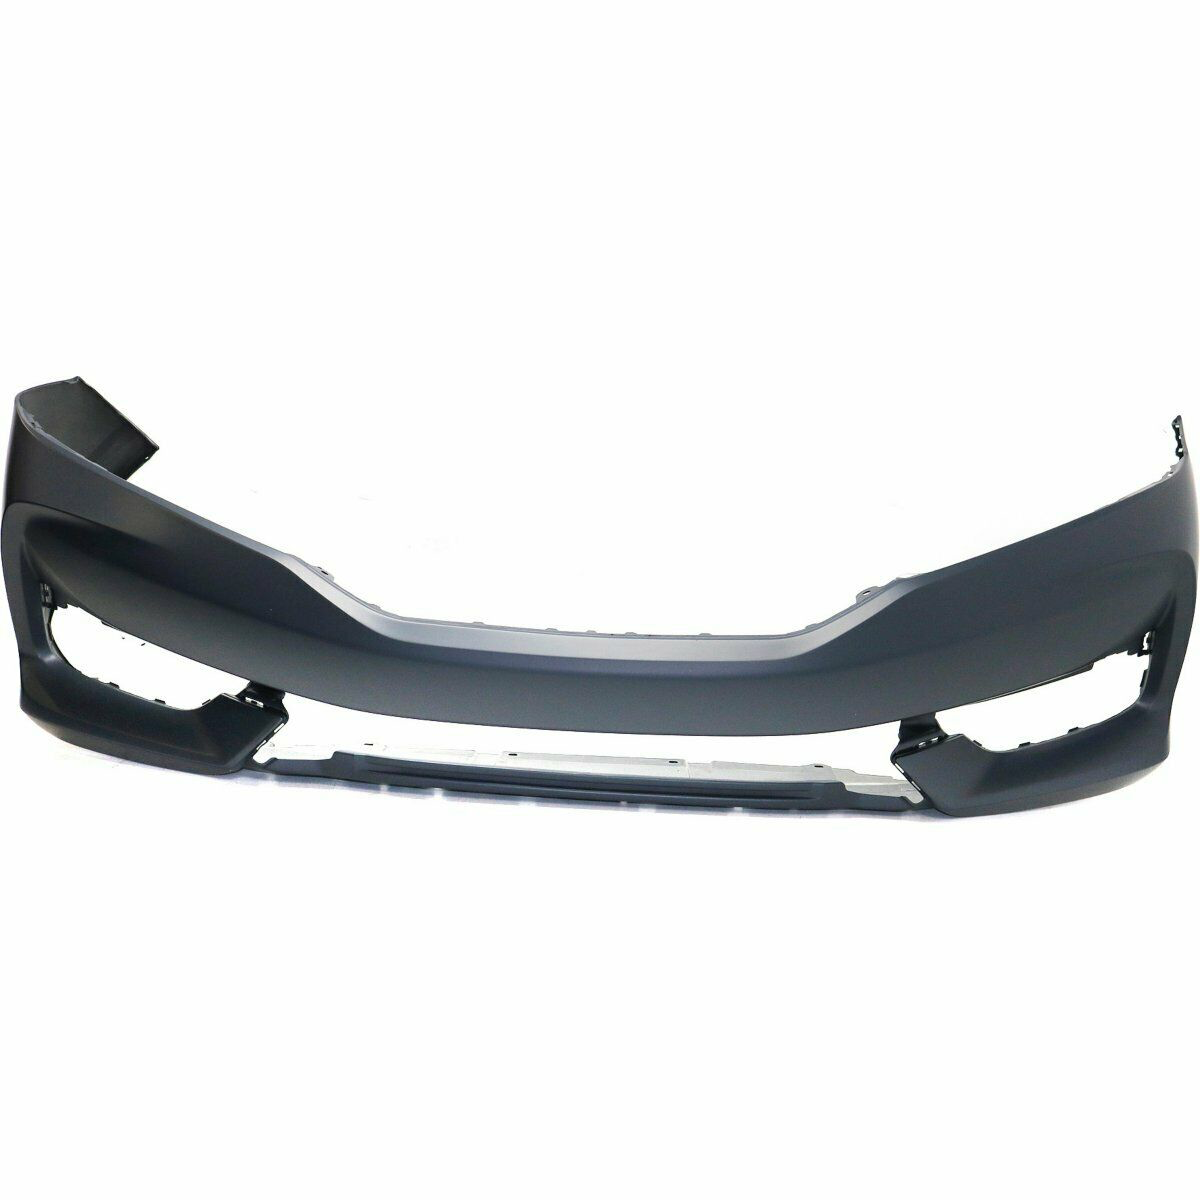 2016-2017 Honda Accord 2 door Coupe Front Bumper Painted to Match